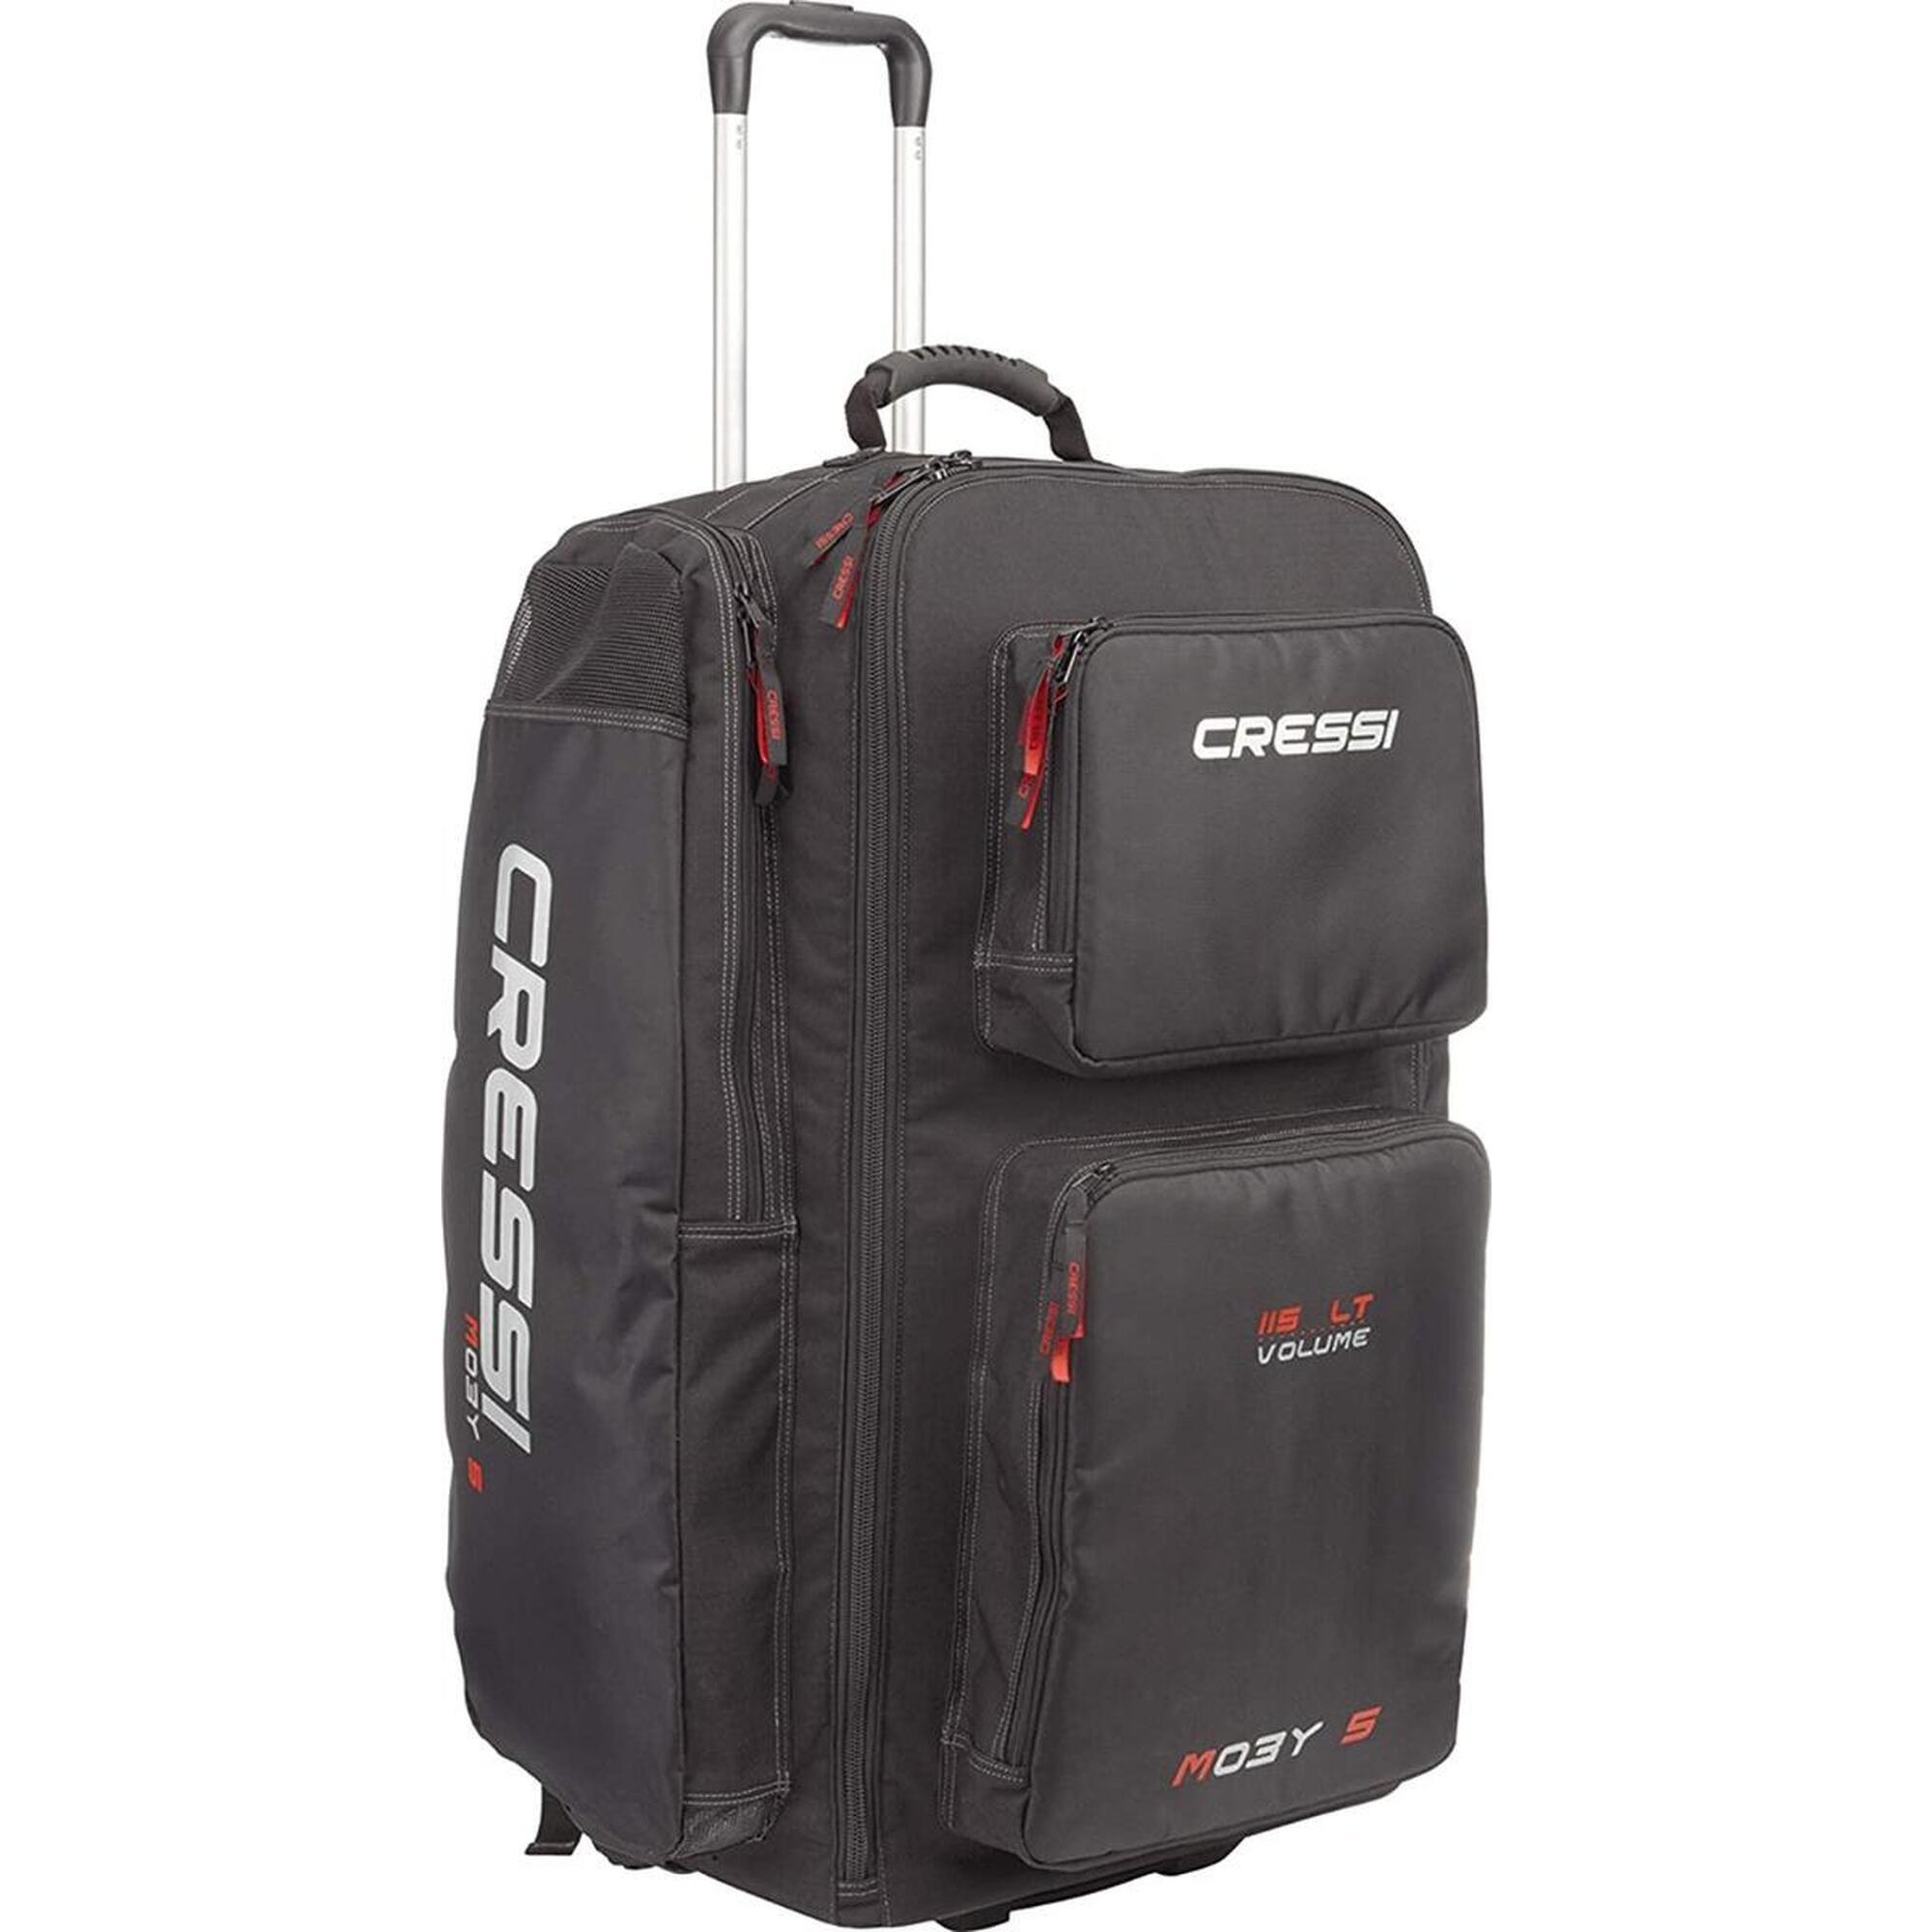 Multifunctionele trolley Cressi MOBY 5